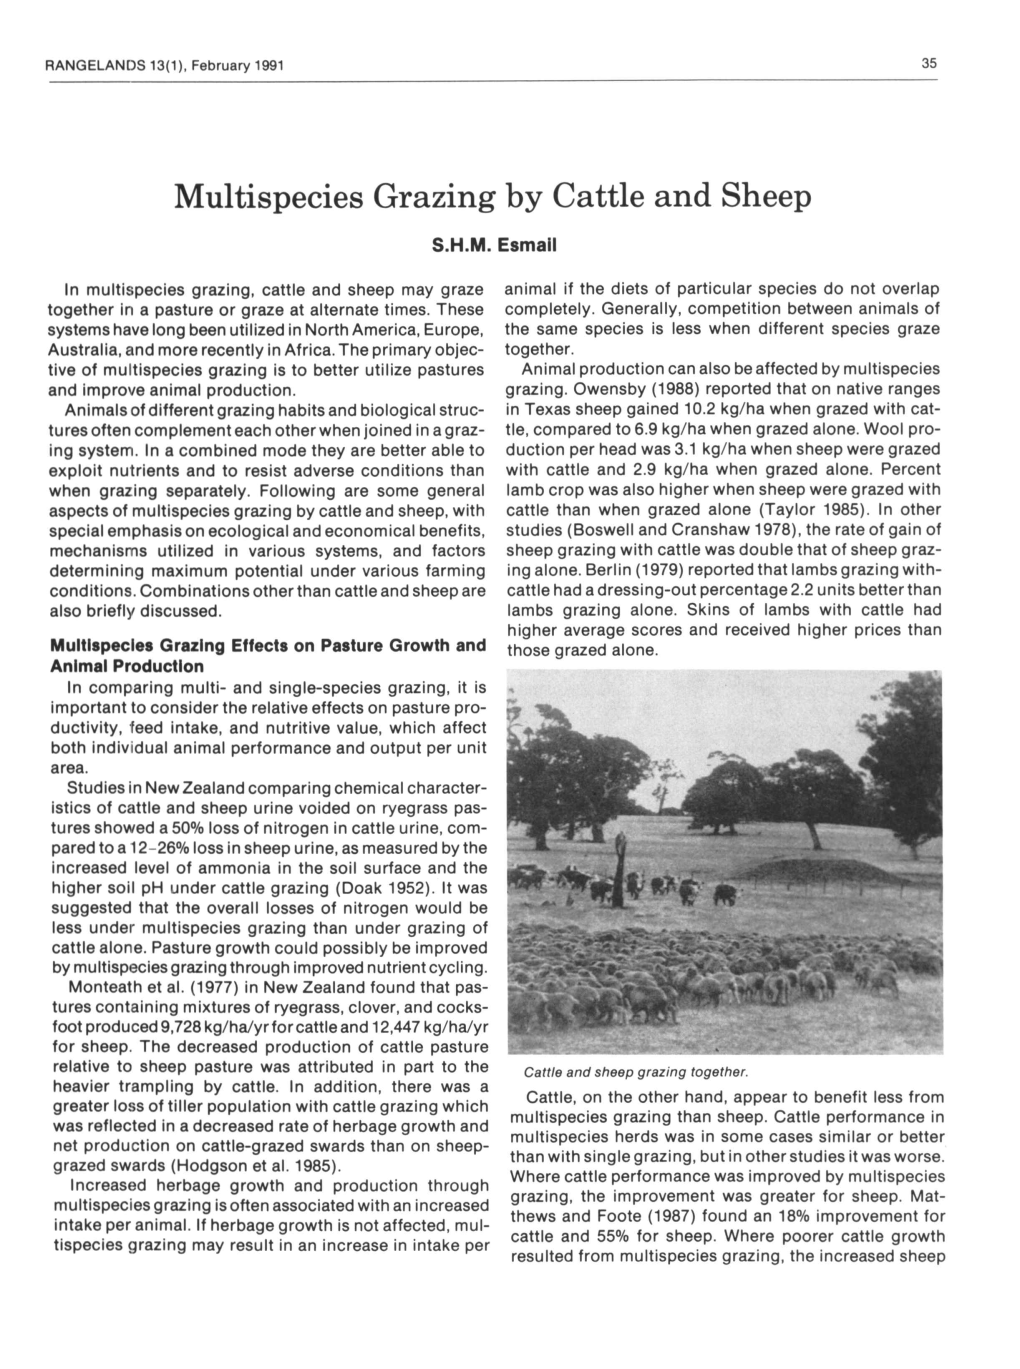 Multispecies Grazing by Cattle and Sheep S.H.M